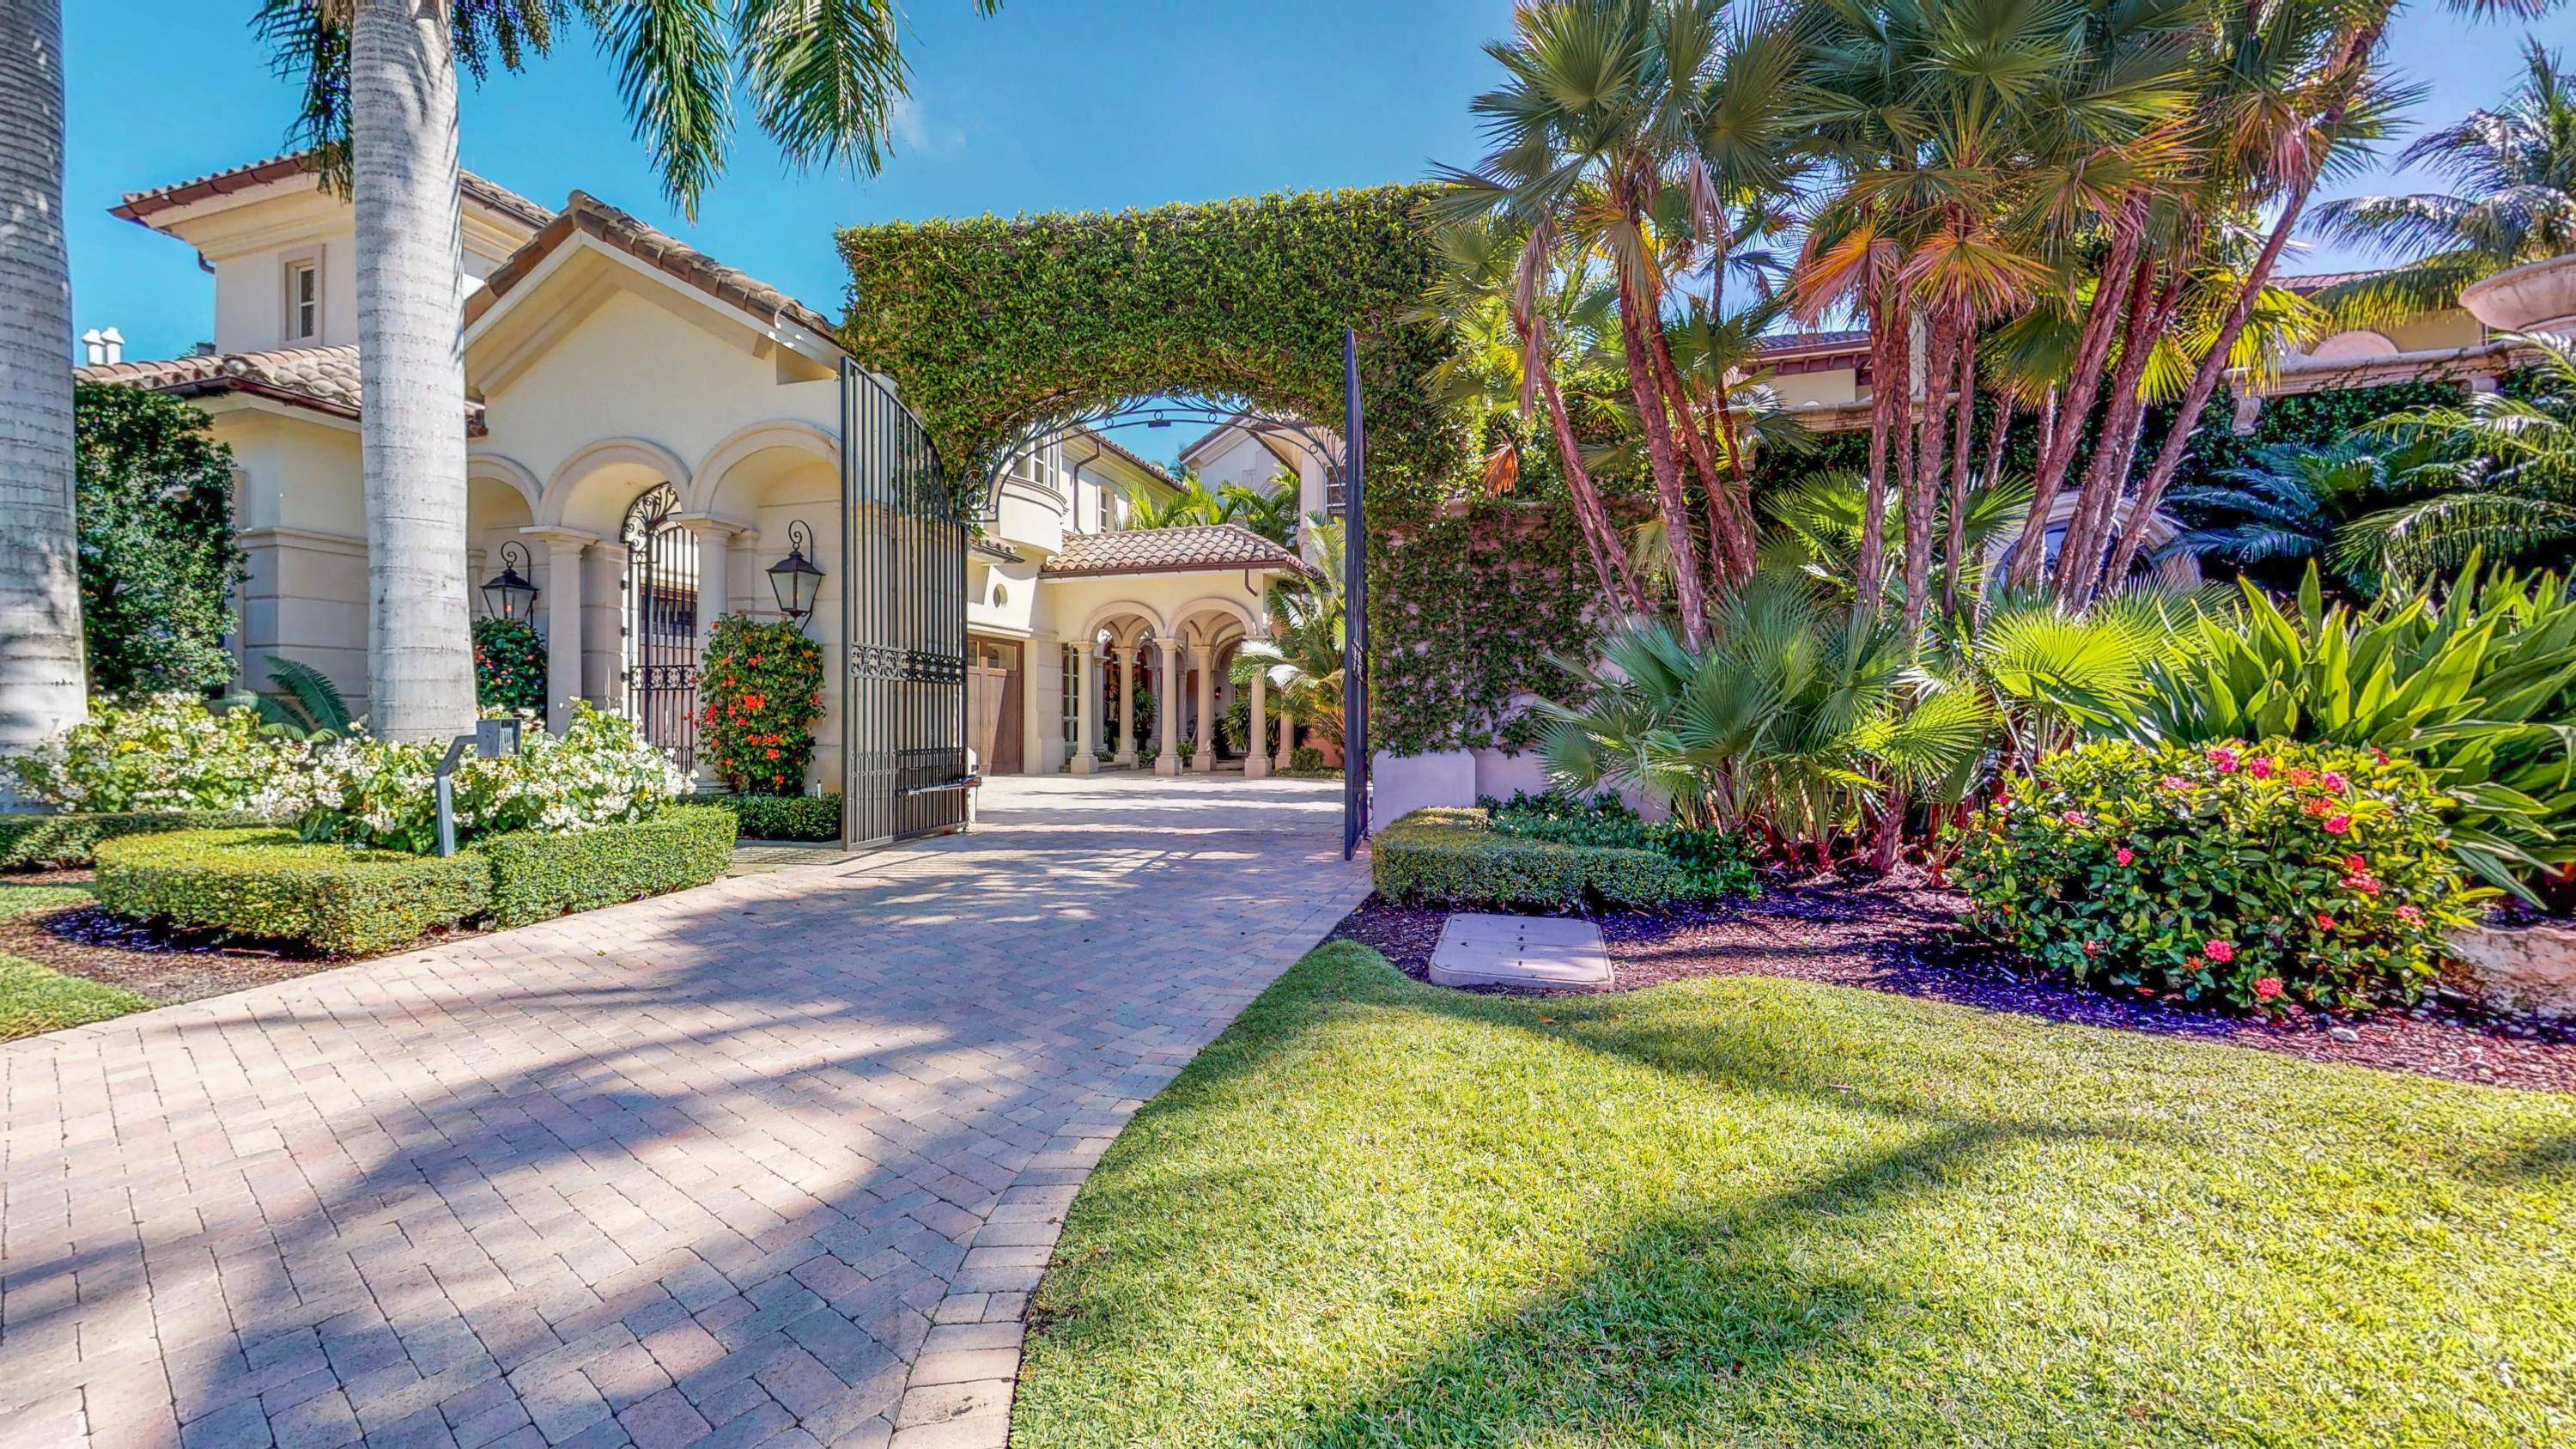 Live in the spectacular gated community of Mizner Lake Estates, an exclusive enclave in Boca Raton within the prestigious Boca Raton Resort Club.